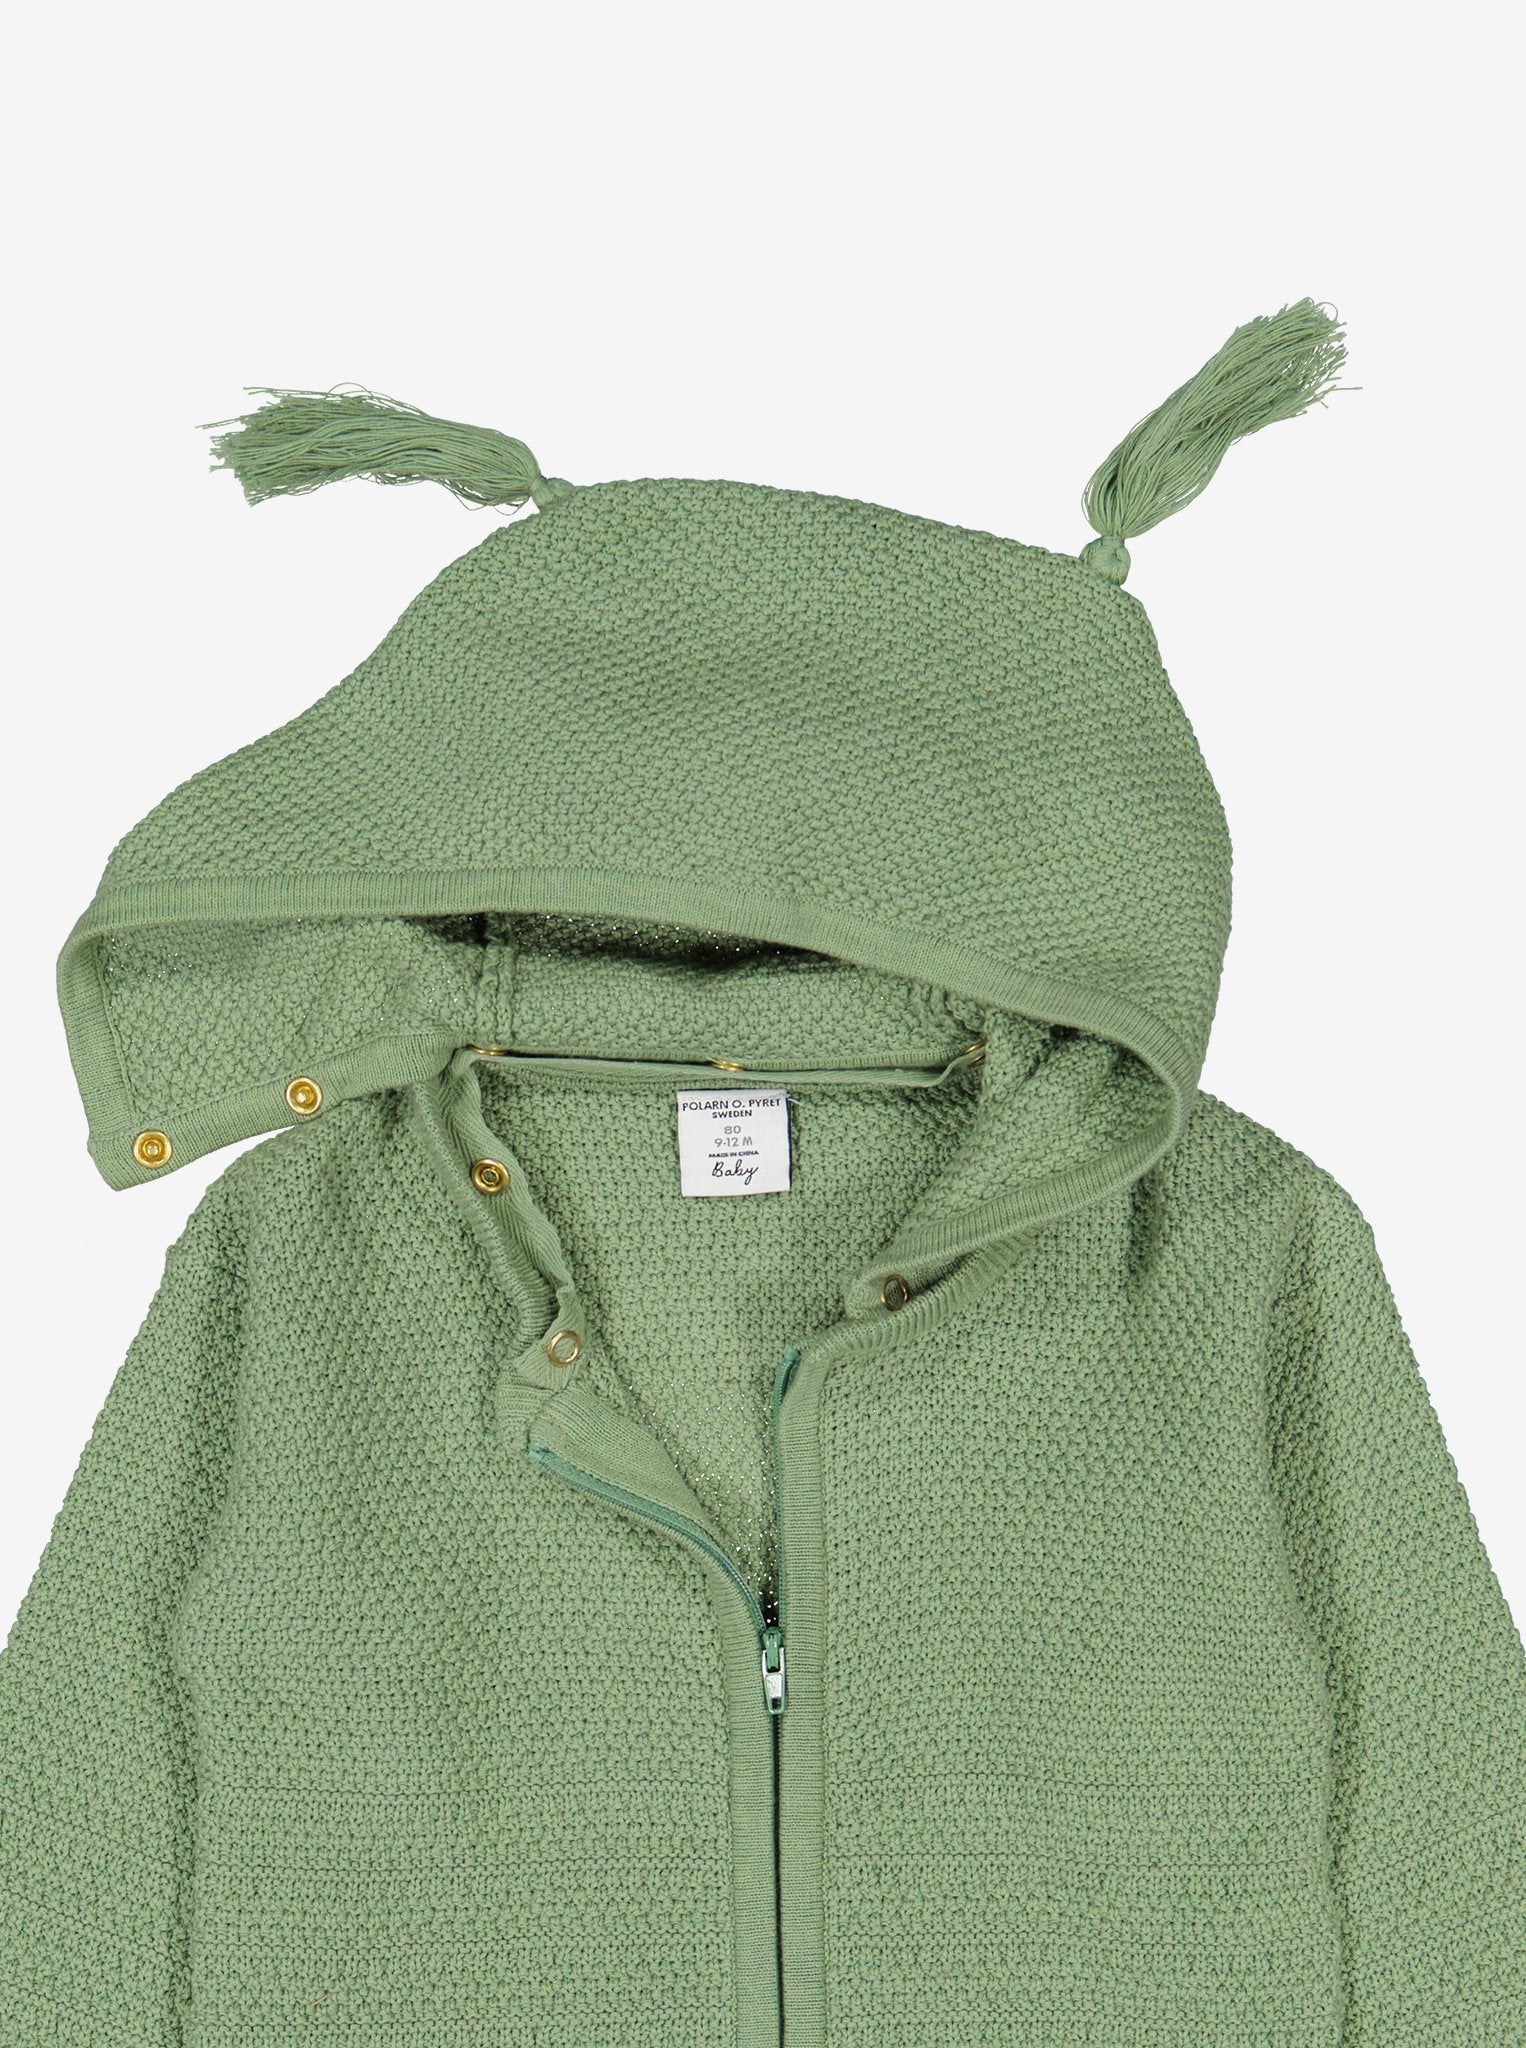  Organic Knitted Green Newborn Baby Hoodie from Polarn O. Pyret Kidswear. Made with 100% organic cotton.